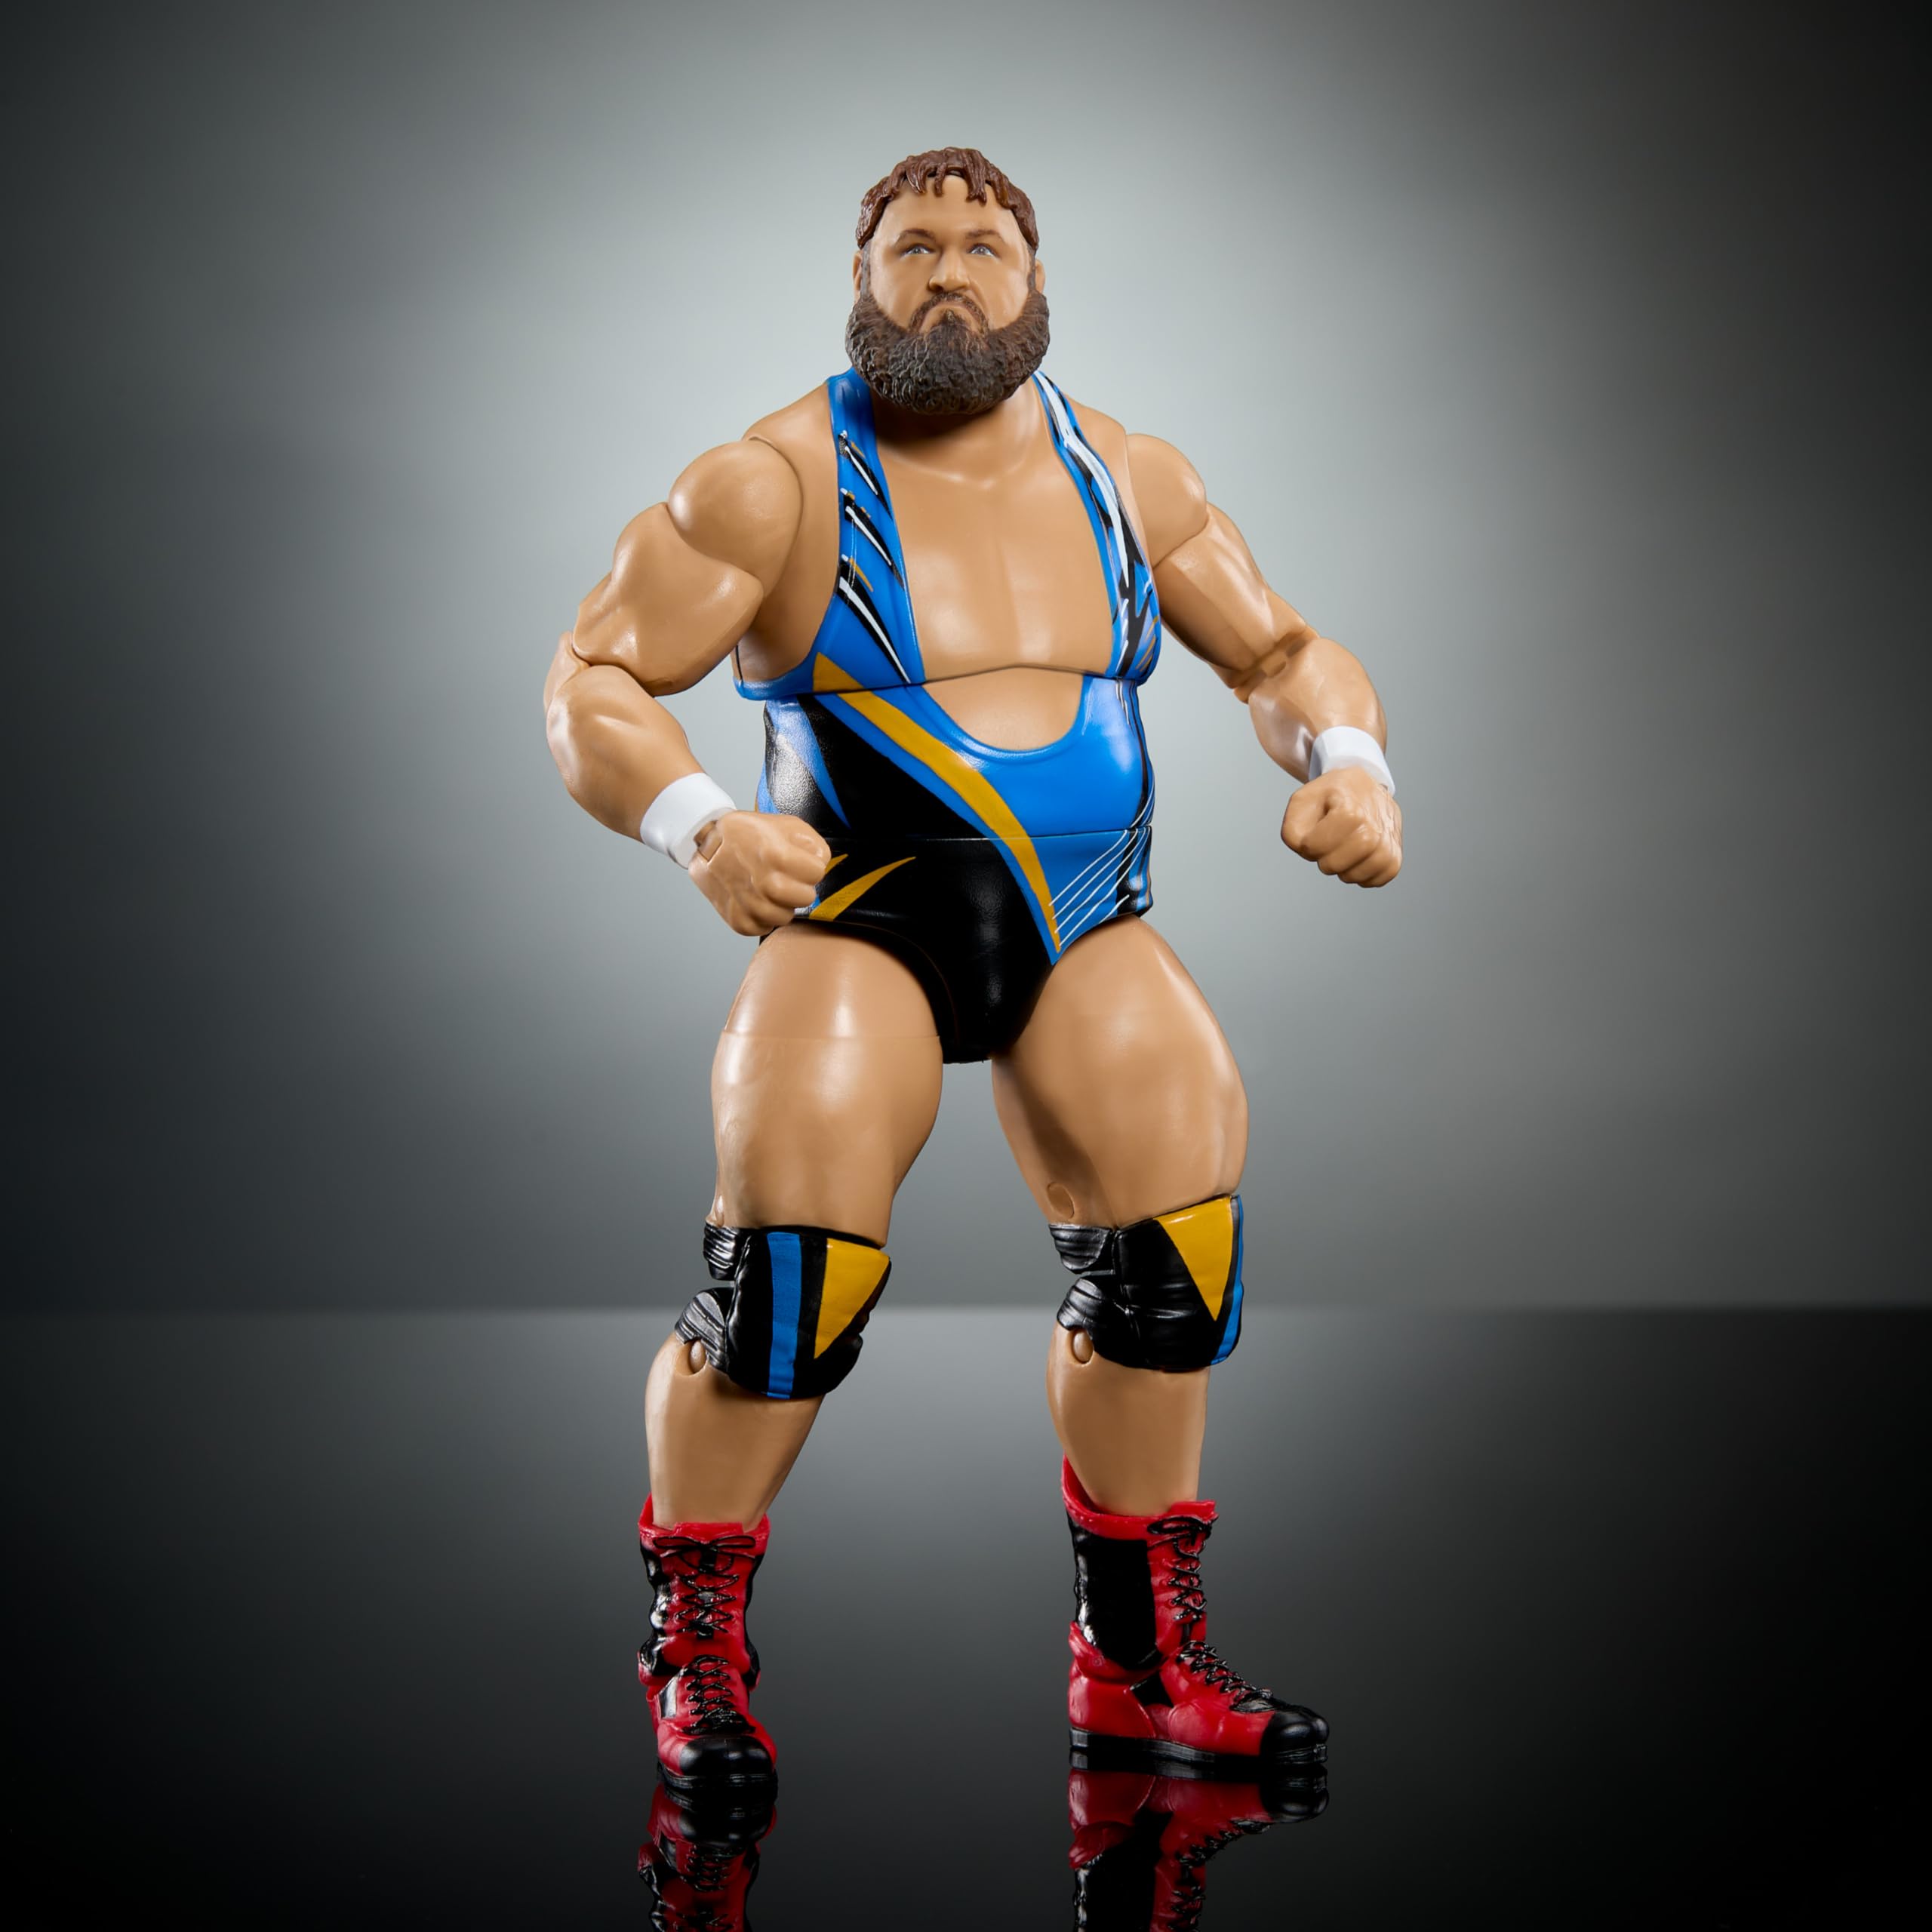 Mattel WWE Elite Action Figure & Accessories, 6-inch Collectible Otis with 25 Articulation Points, Life-Like Look & Swappable Hands